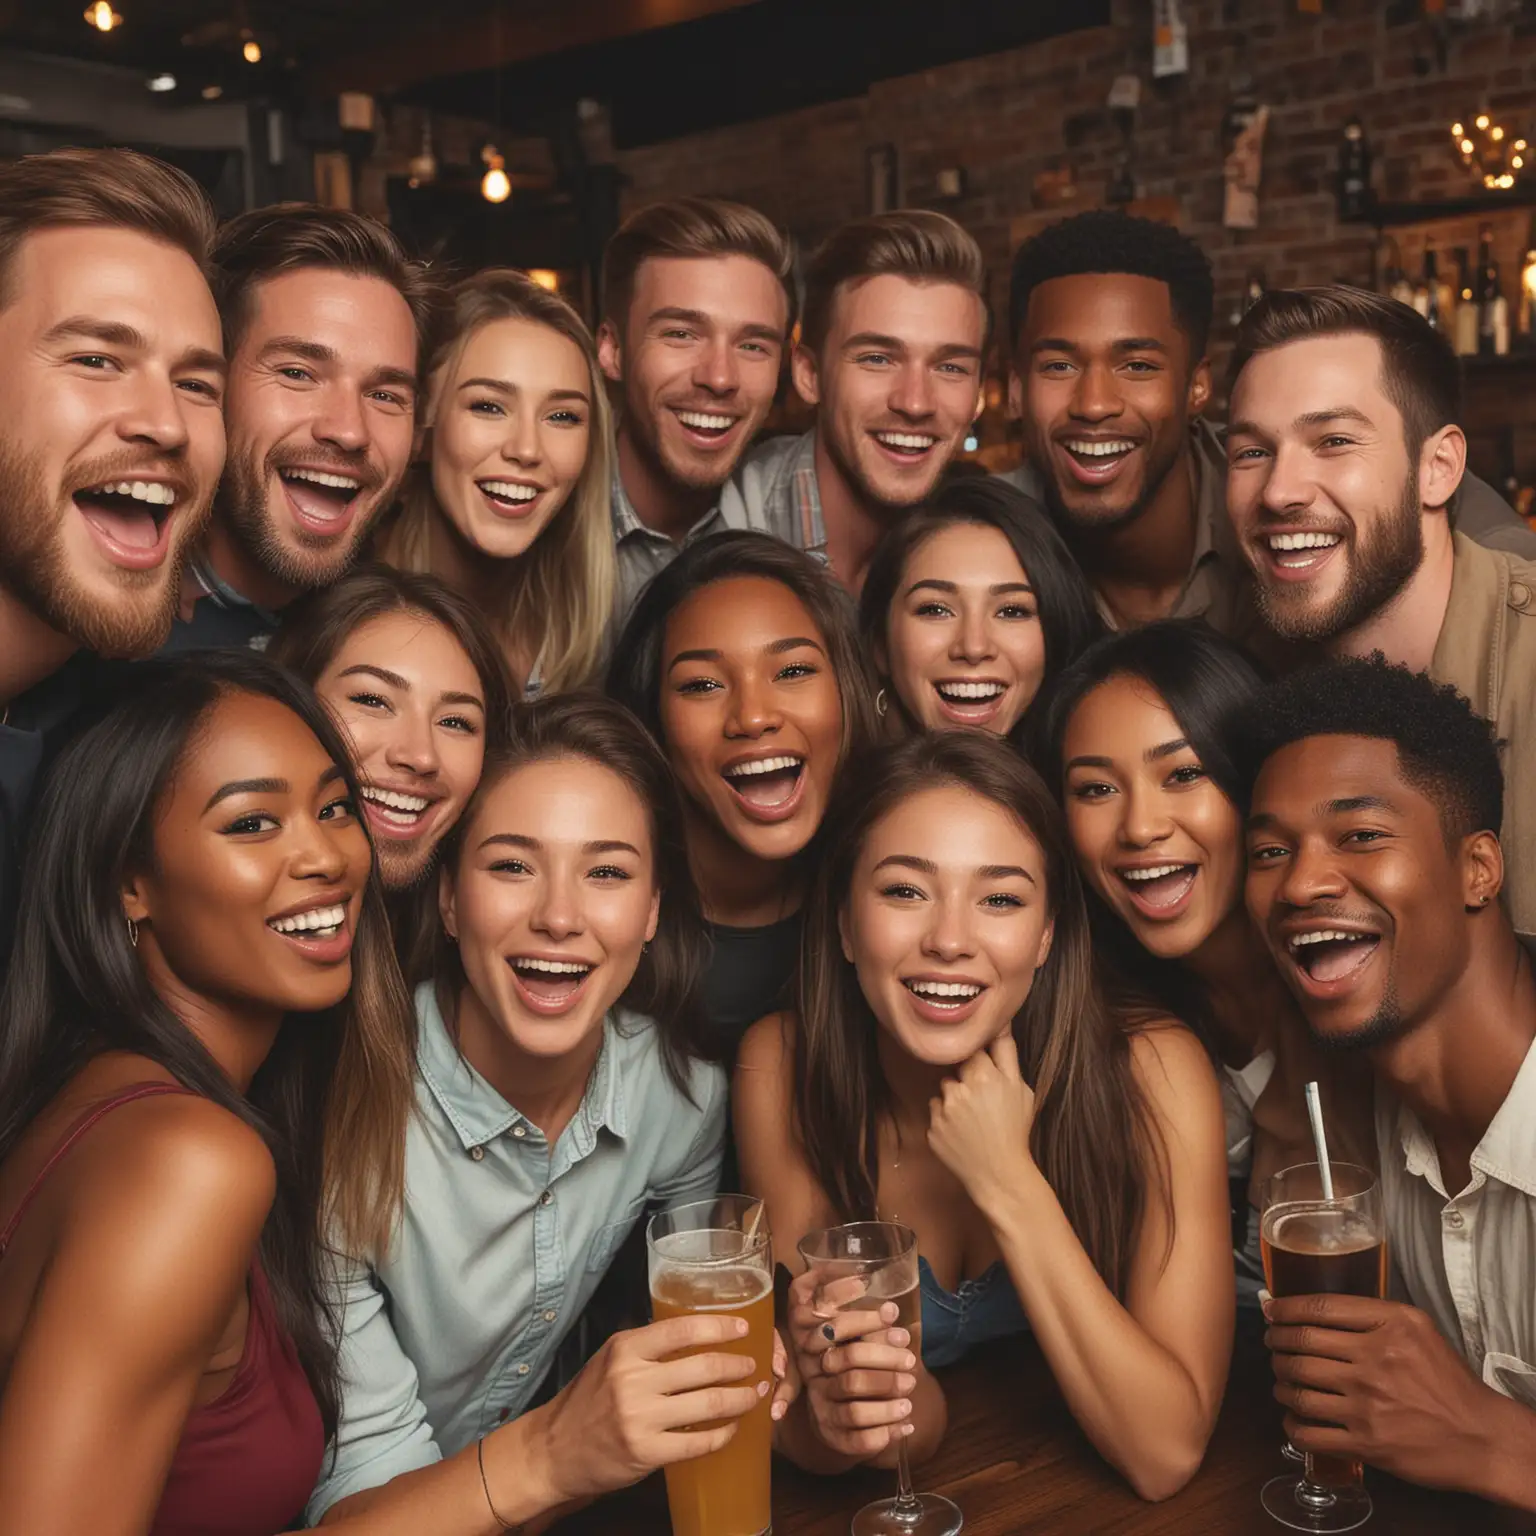 Diverse Group Celebrating at Bar with Exquisite Facial Features